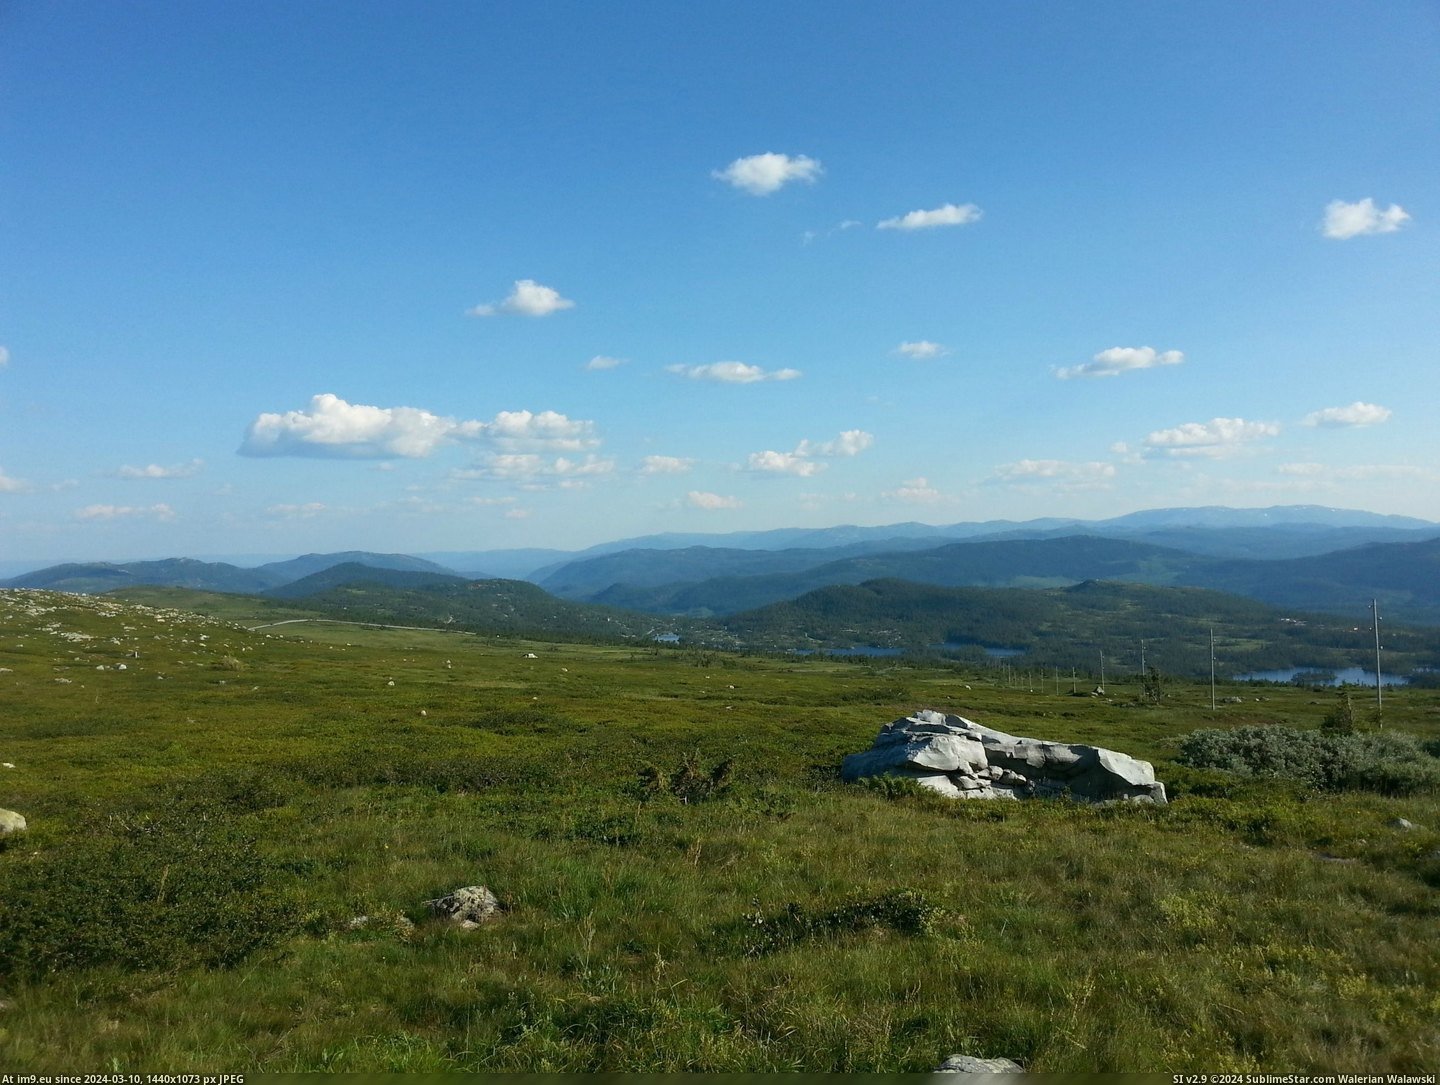 #Day #Way #Norway #2448x1836 #Gaustatoppen #Clear #Sweden #Base [Earthporn] They say you can see all the way to Sweden on a clear day -- from the base of Gaustatoppen, Norway [2448x1836] Pic. (Image of album My r/EARTHPORN favs))